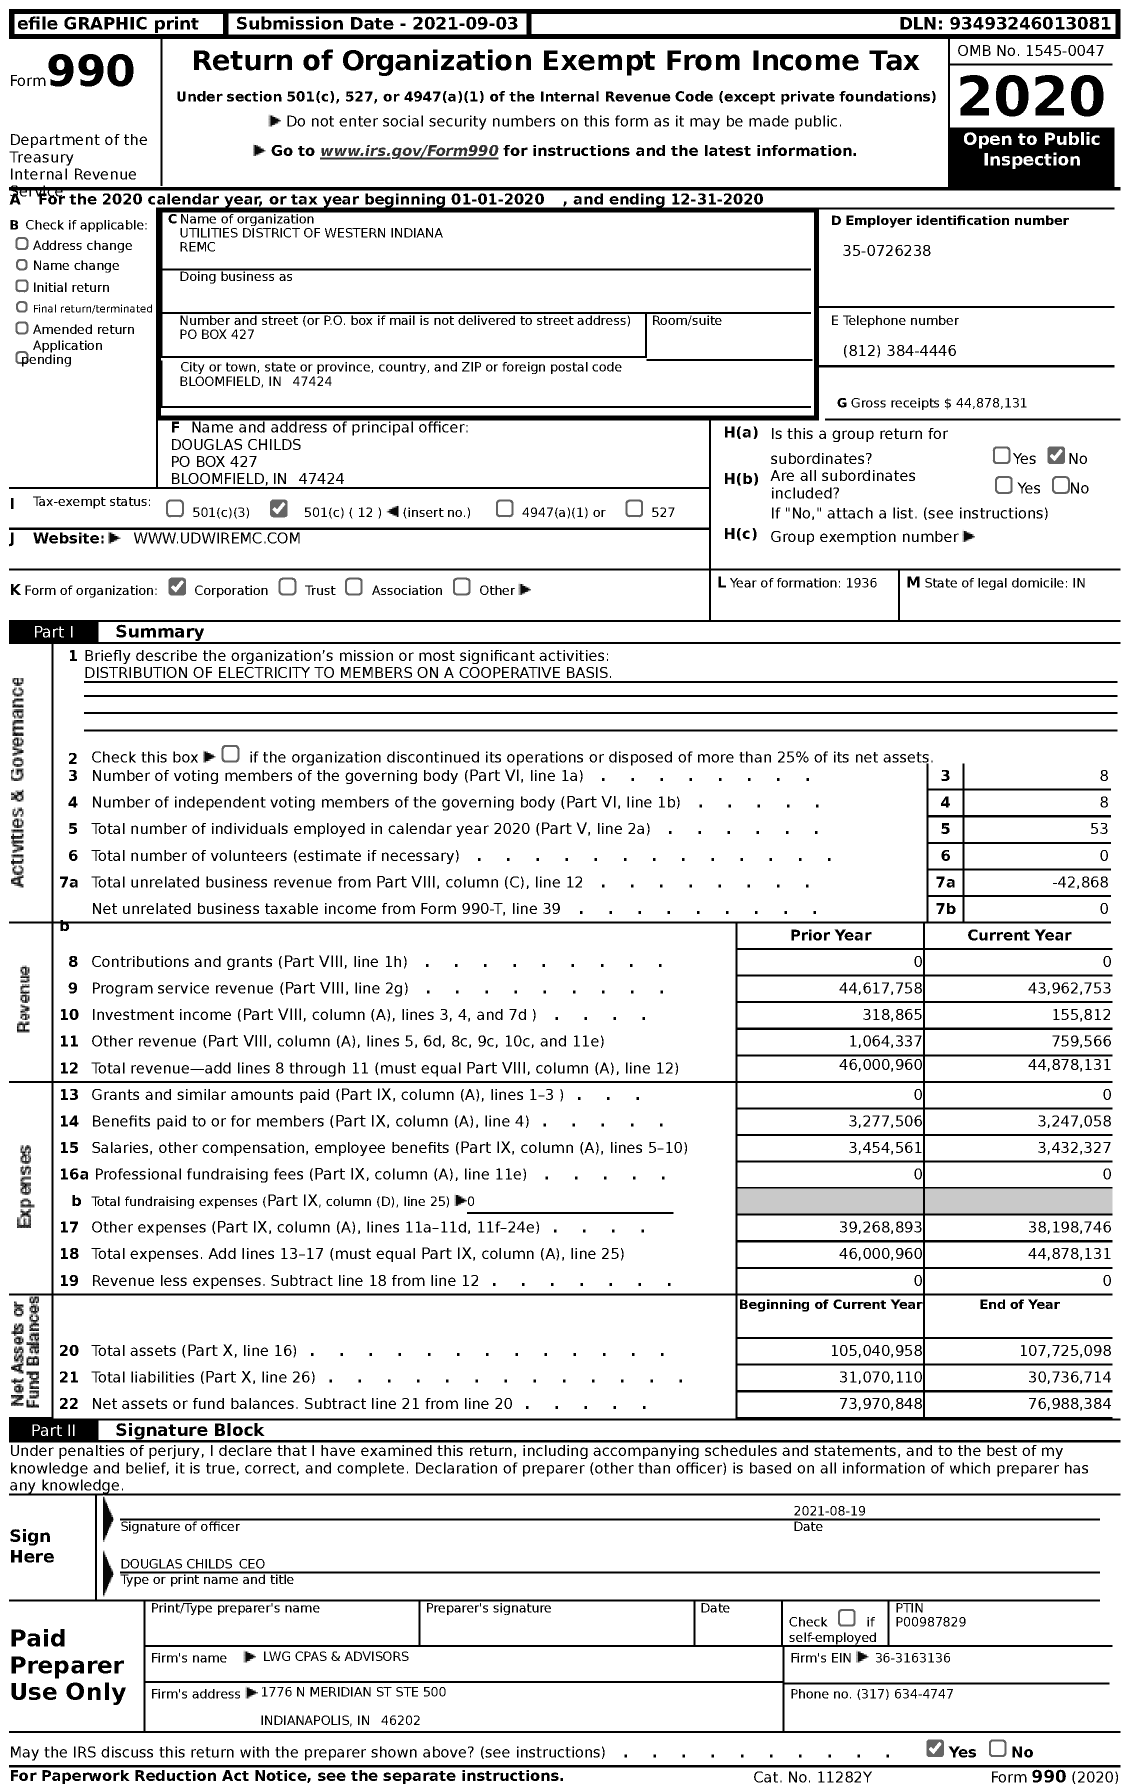 Image of first page of 2020 Form 990 for Utilities District of Western Indiana Remc